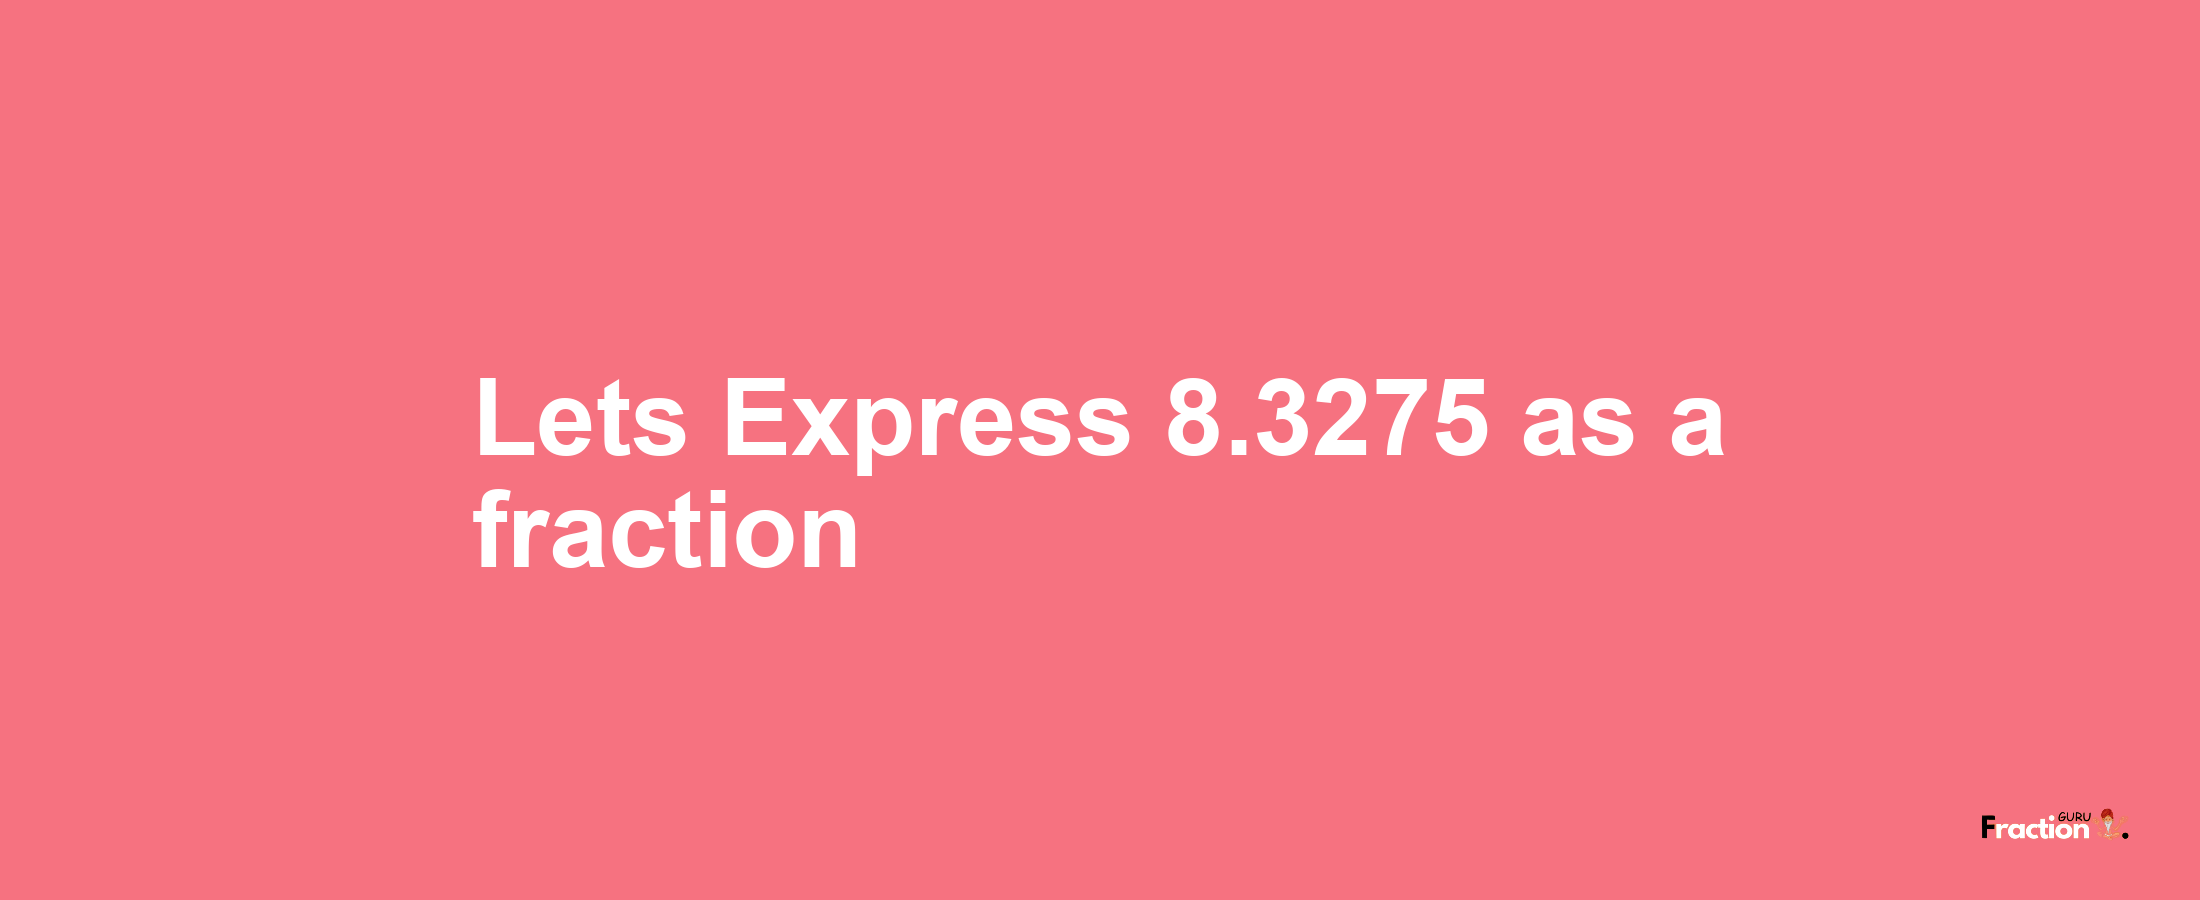 Lets Express 8.3275 as afraction